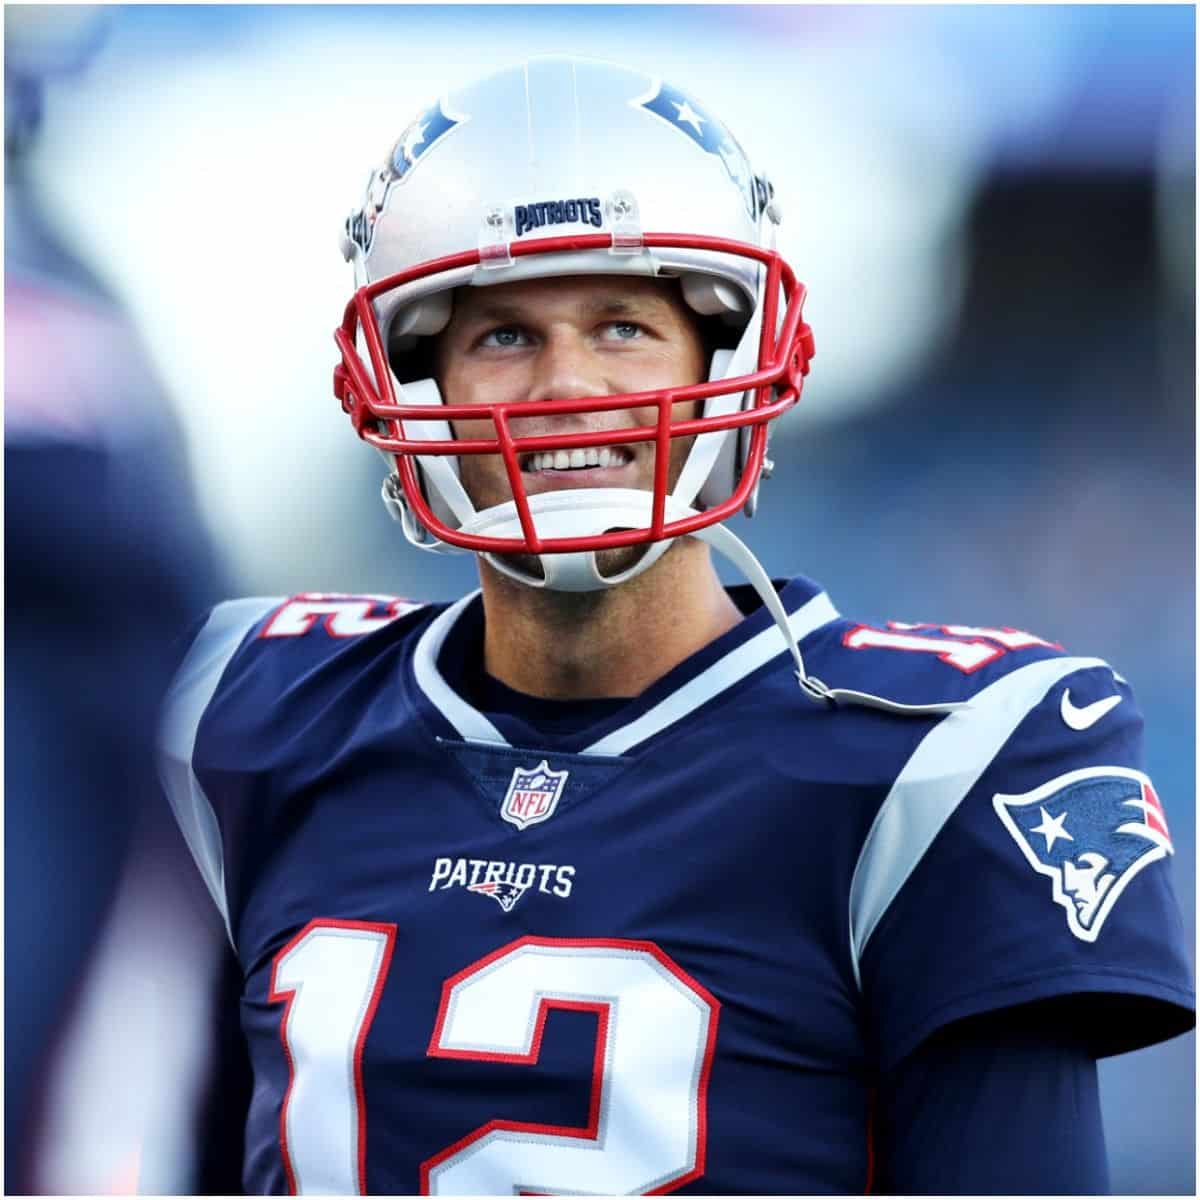 what is the net worth of Tom Brady